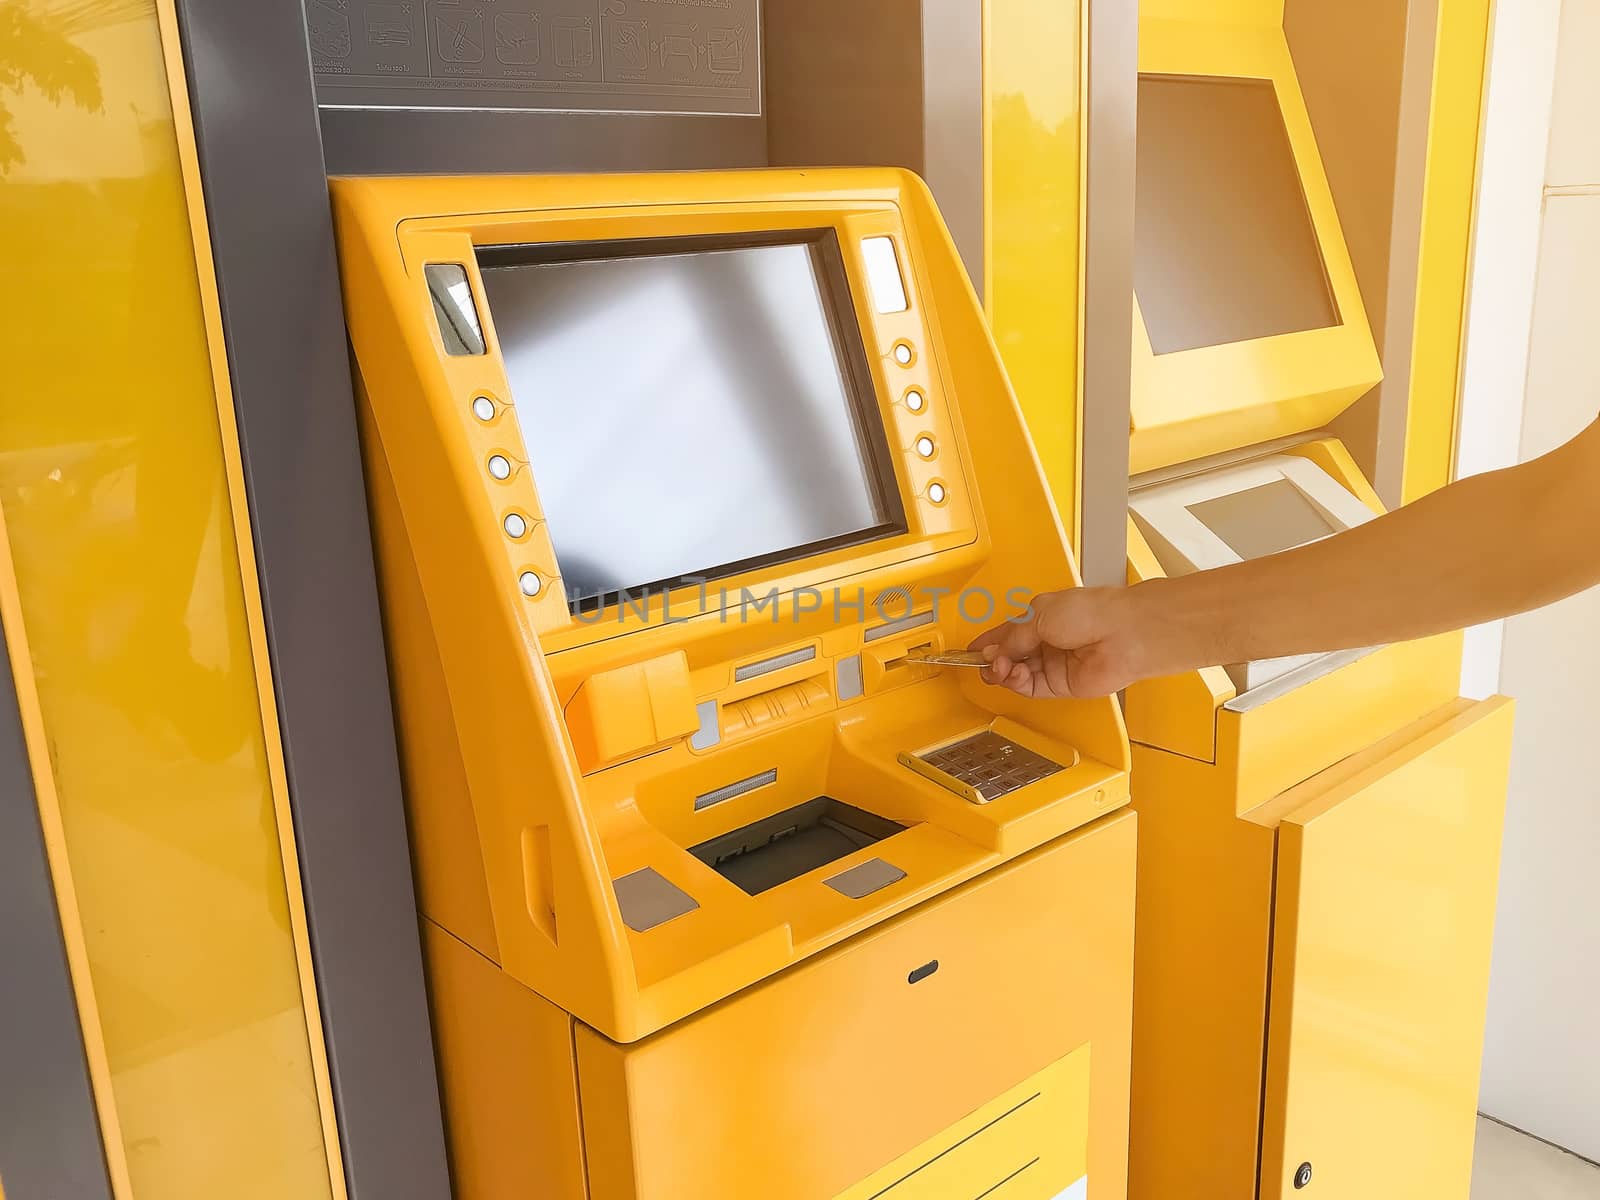 Man's hand is inserting an ATM card in a bank cash machine.